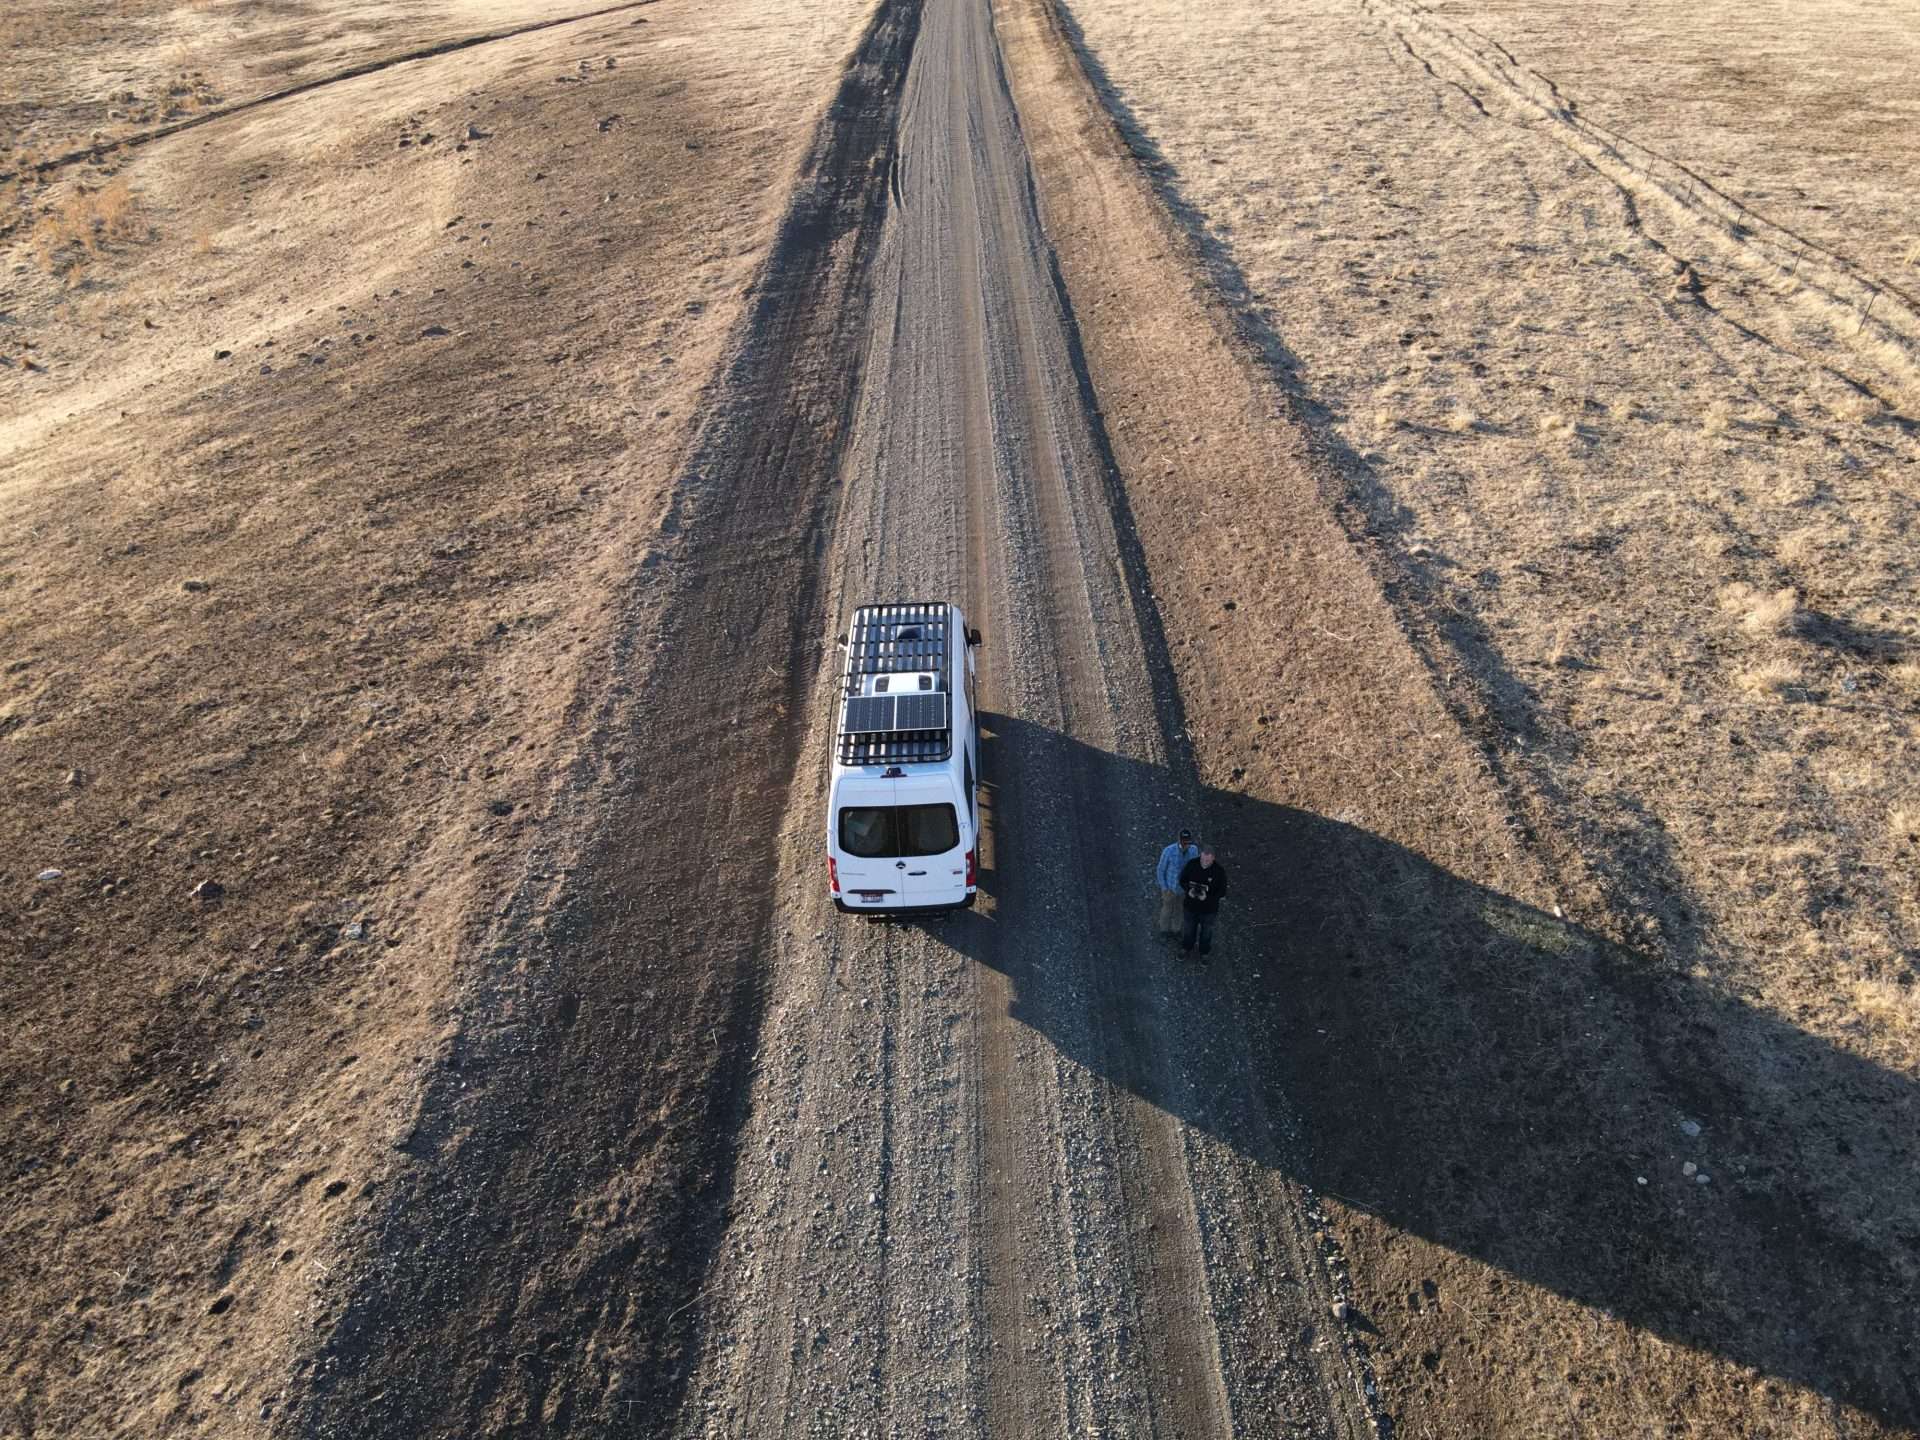 Aerial image of camper van driving down dirt road with solar panels installed.